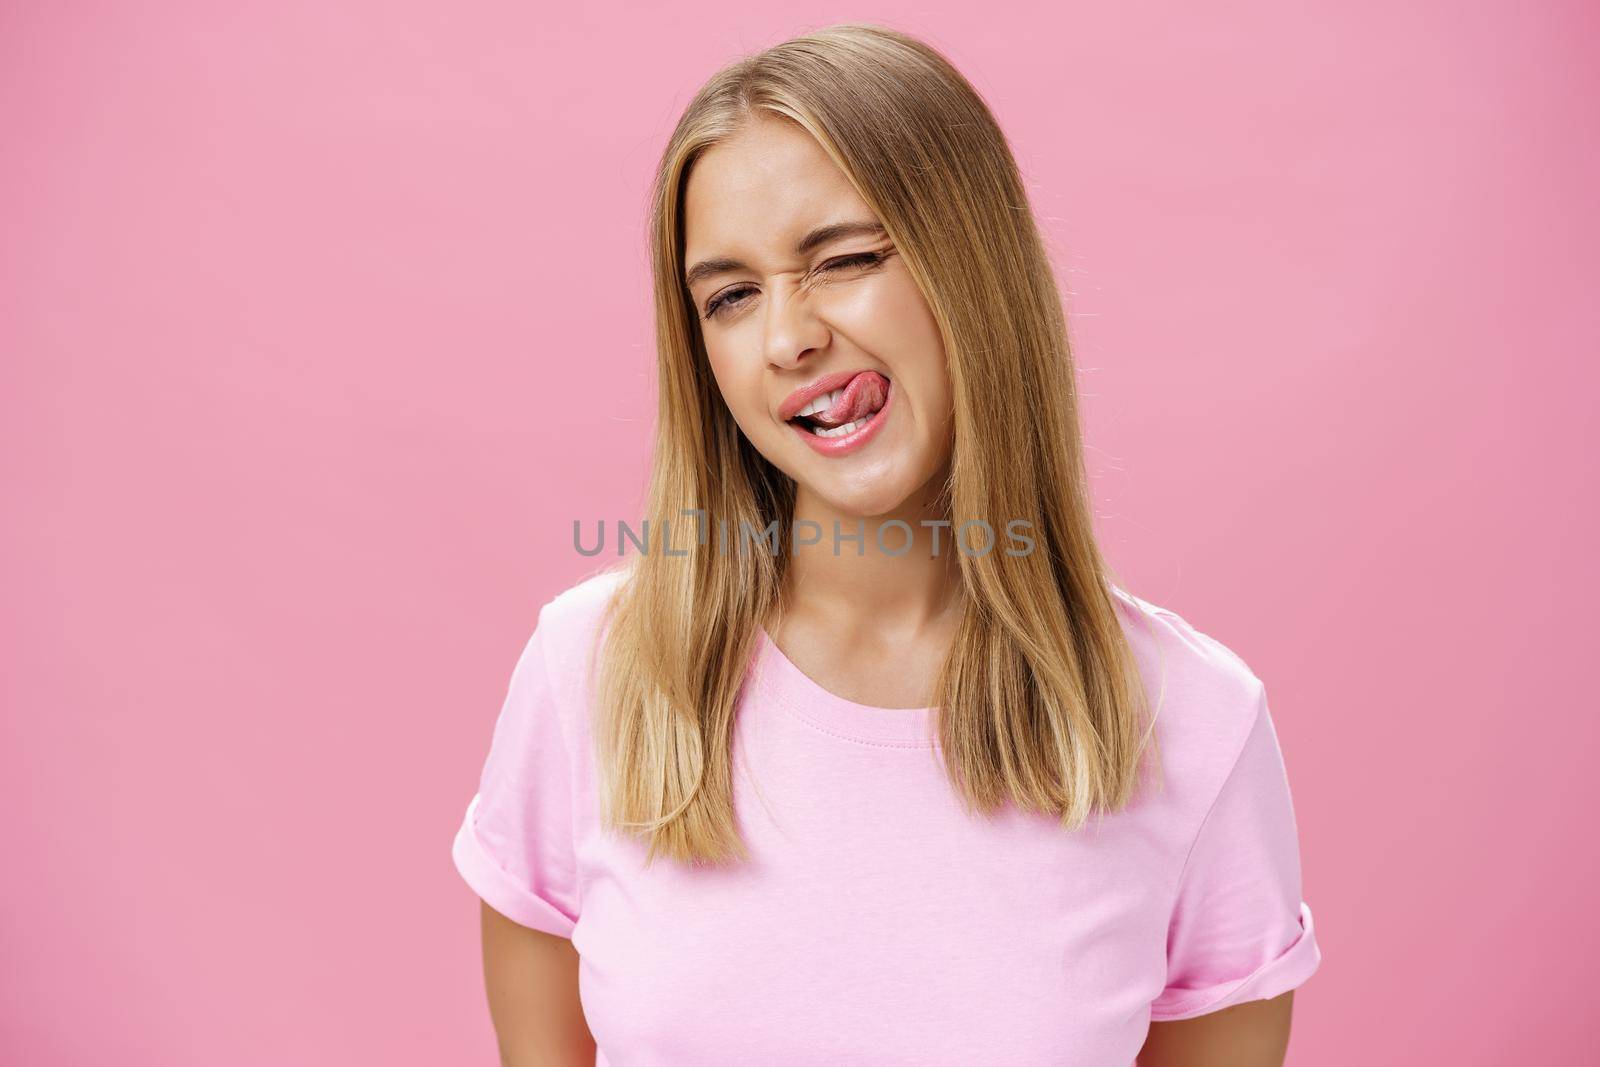 Playful flirty attractive young girl with fair straight hair in t-shirt winking at camera smiling and licking upper lip with tongue feeling enthusiastic and carefree against pink background. Emotions concept